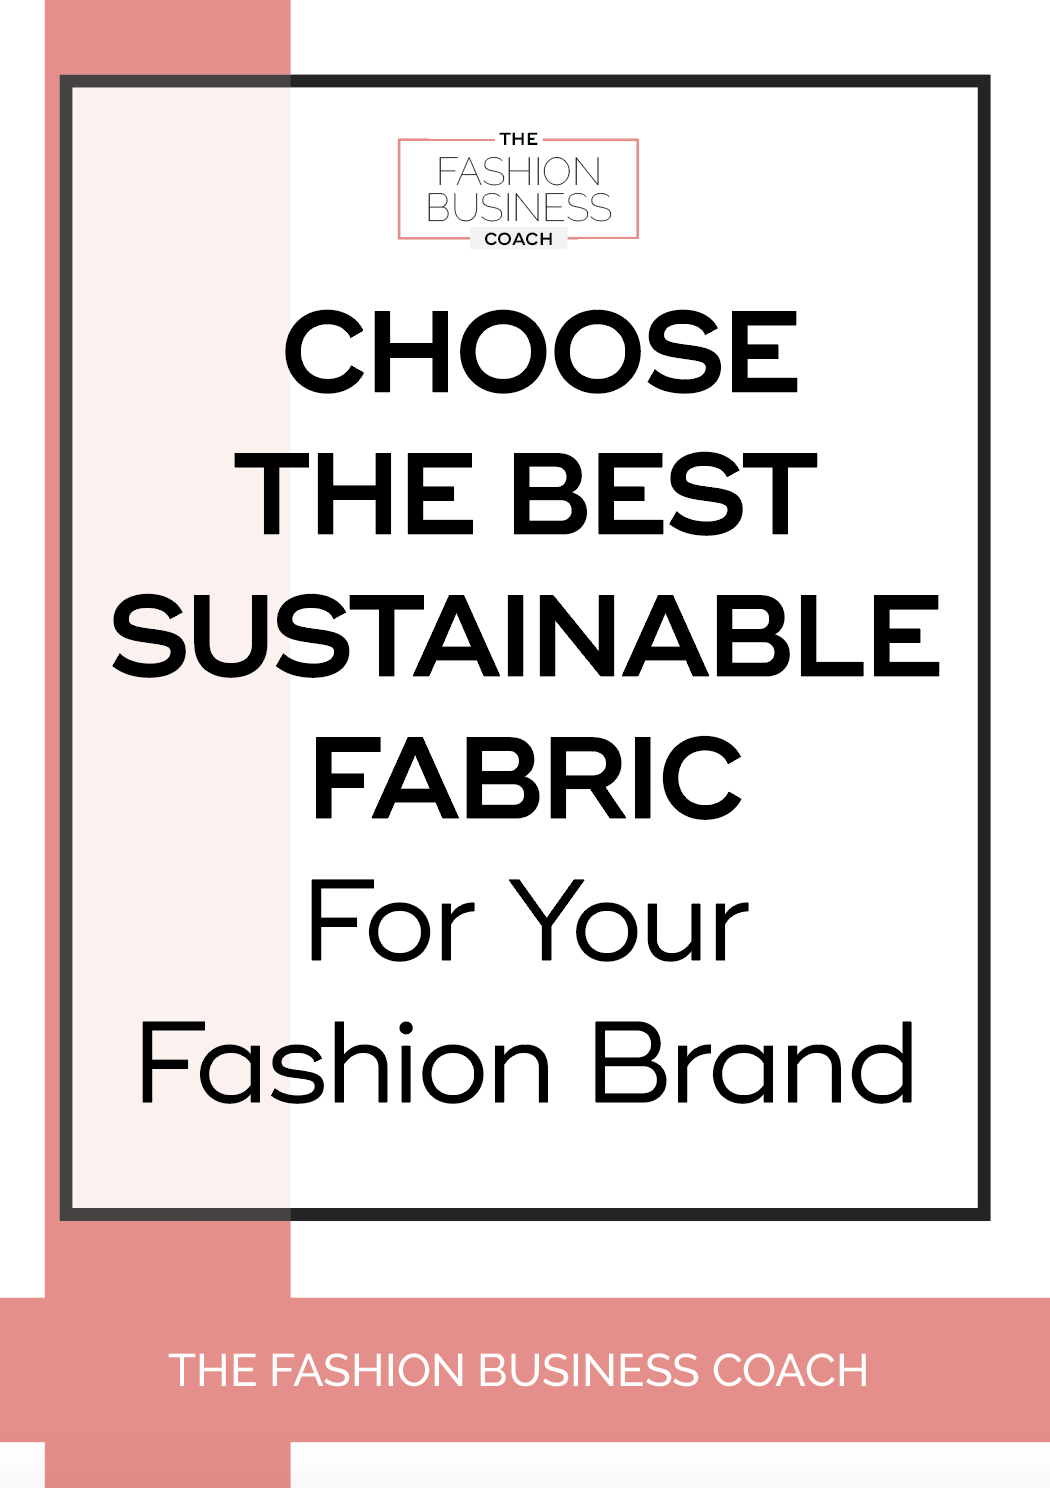 Choose the Best Sustainable Fabric for your Fashion Brand 1.png